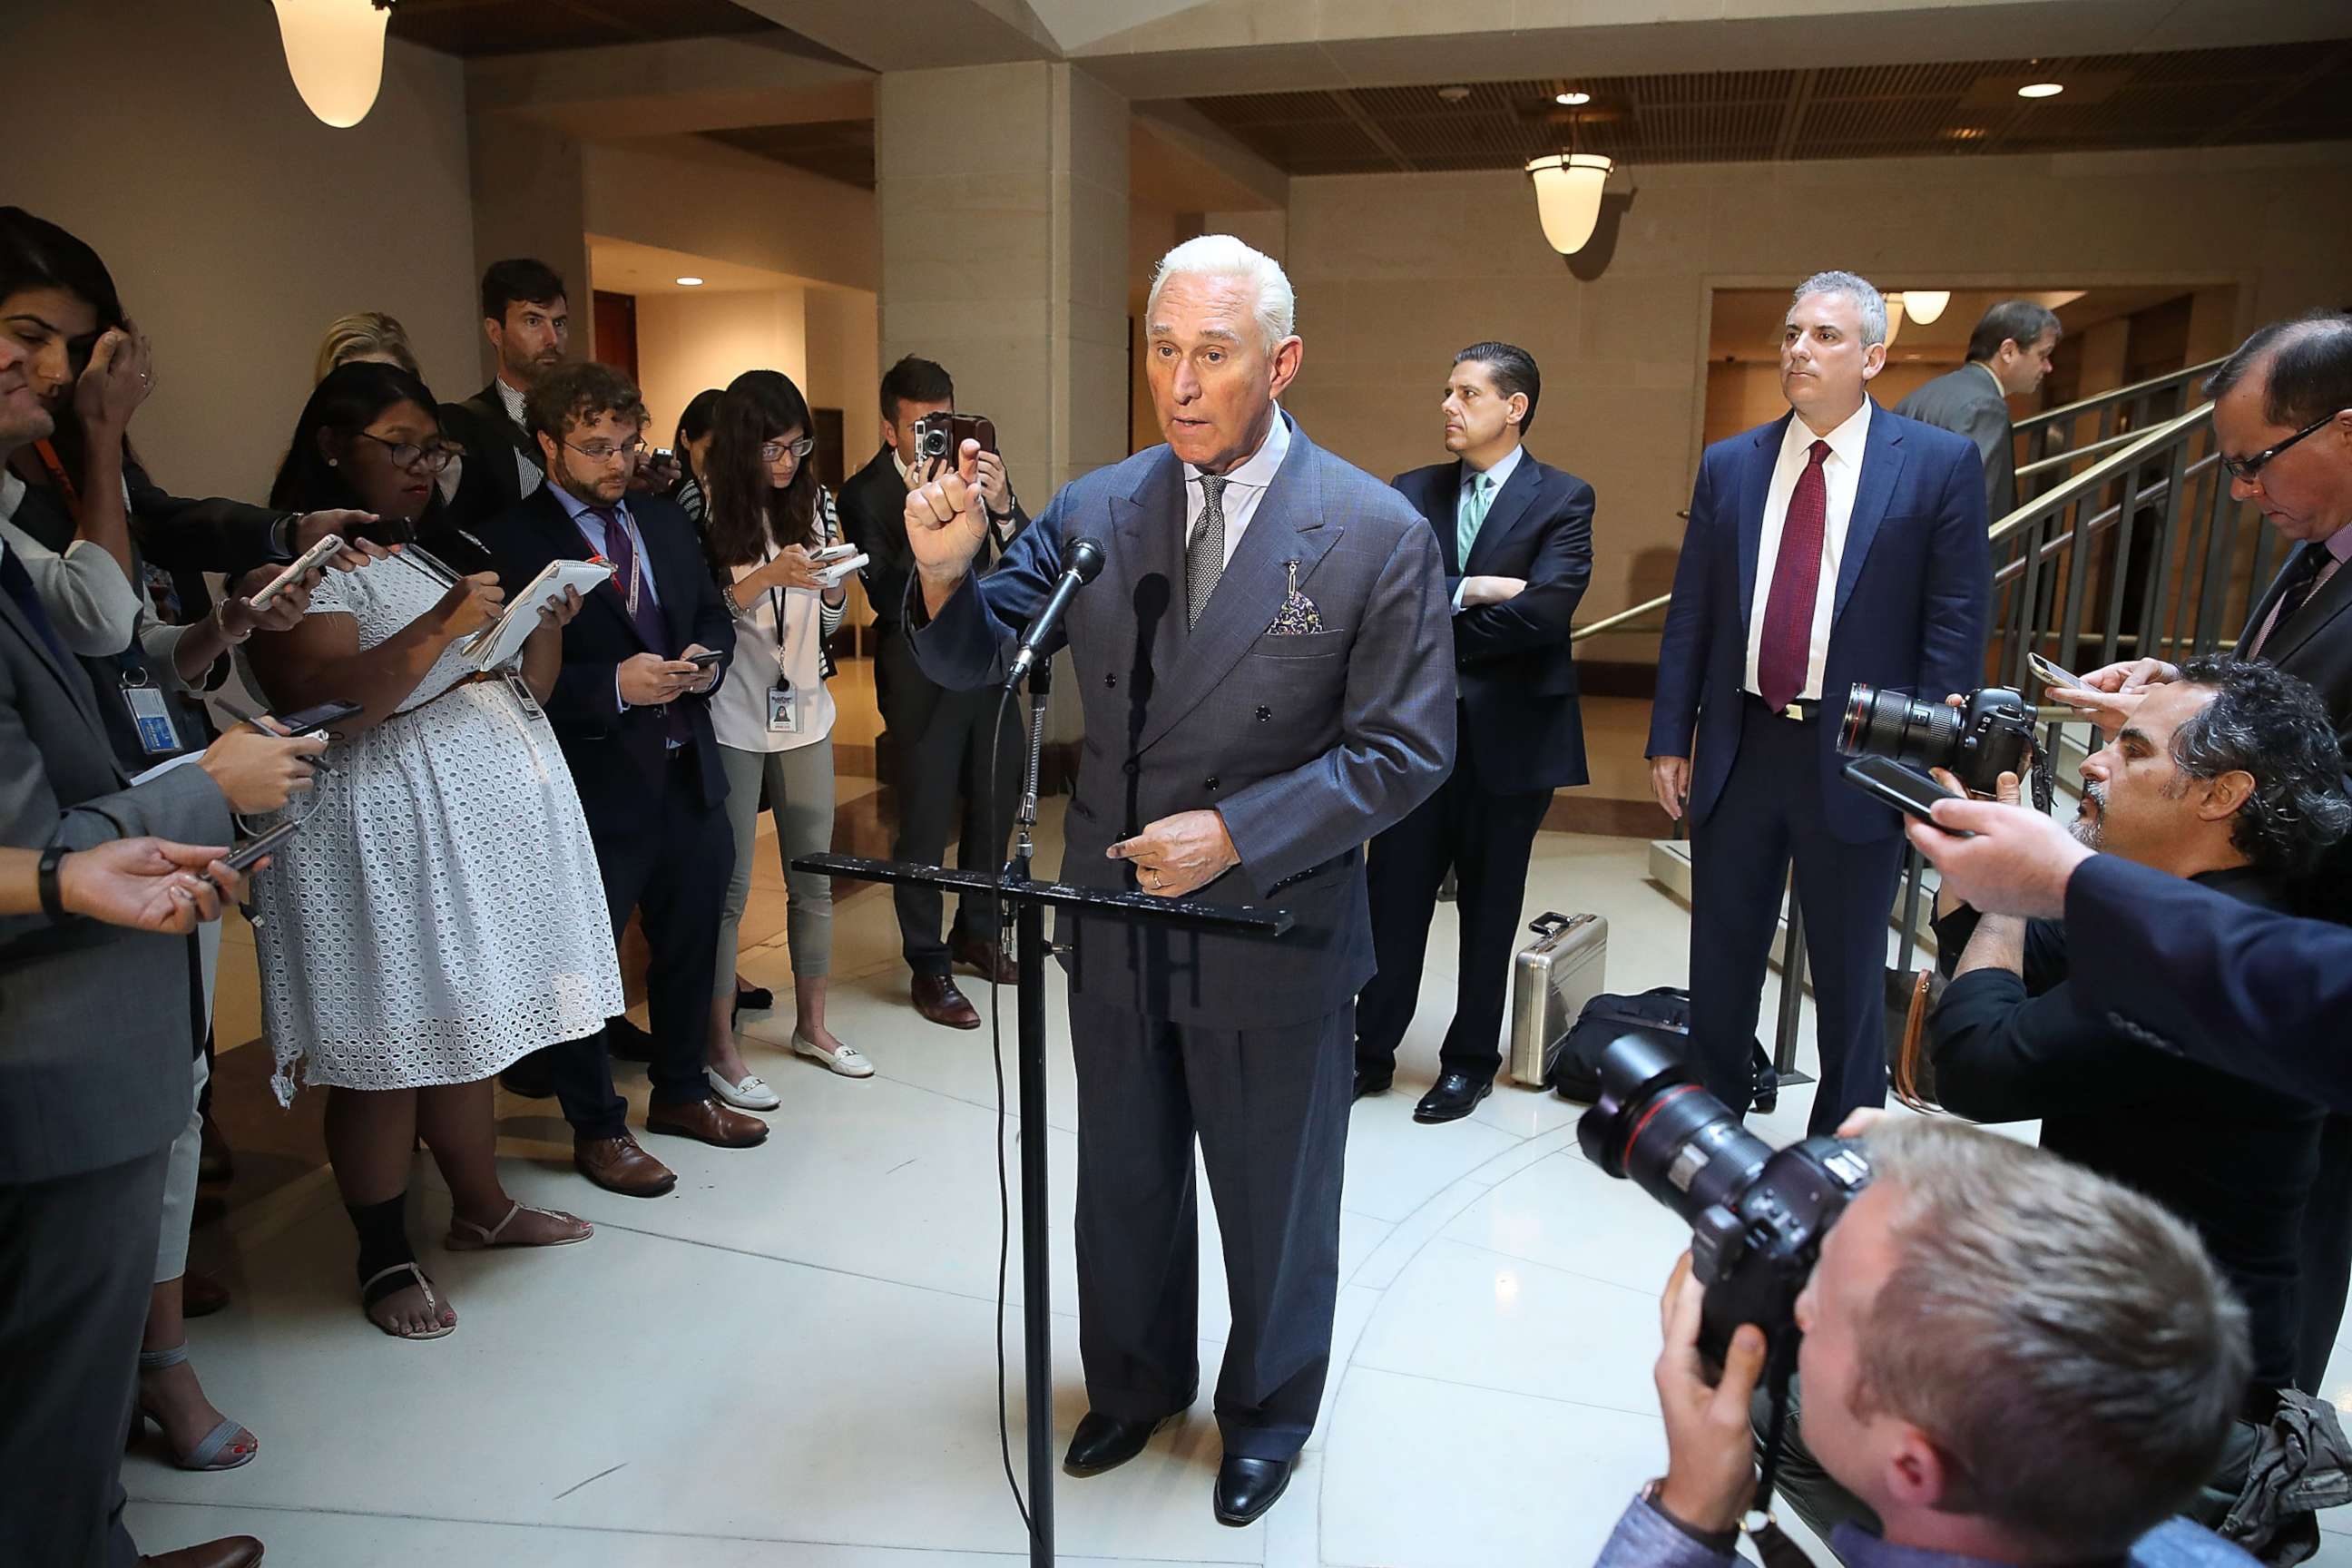 PHOTO: Roger Stone, former confidant to President Trump speaks to the media after appearing before the House Intelligence Committee during a closed door hearing, Sept. 26, 2017, in Washington, DC.